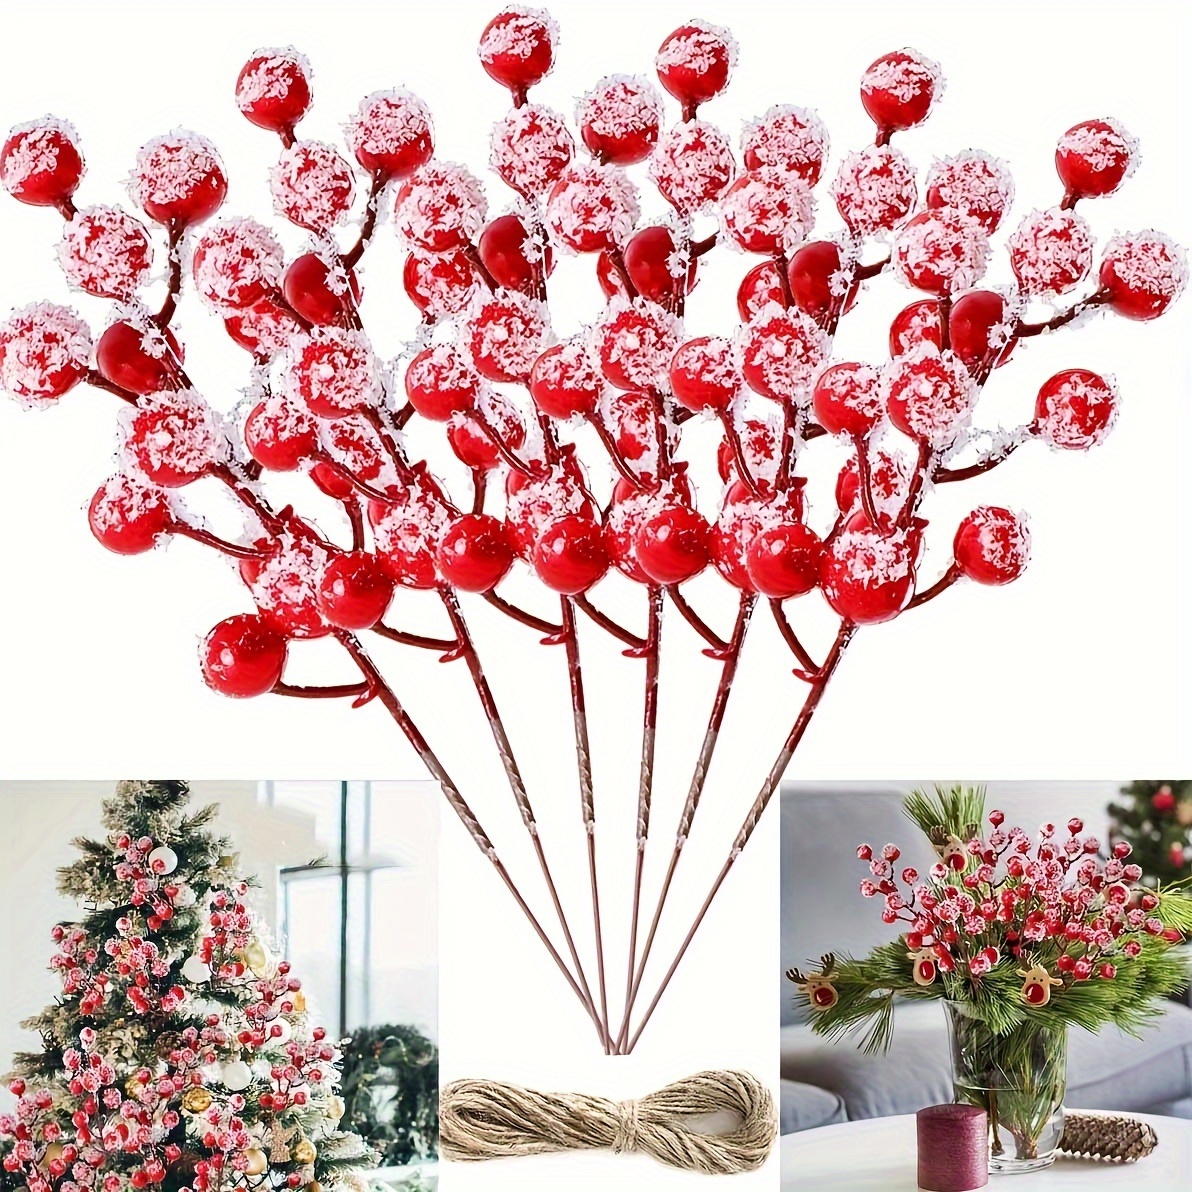 10pcs Artificial Christmas Glitter Berries Picks with Stems Faux